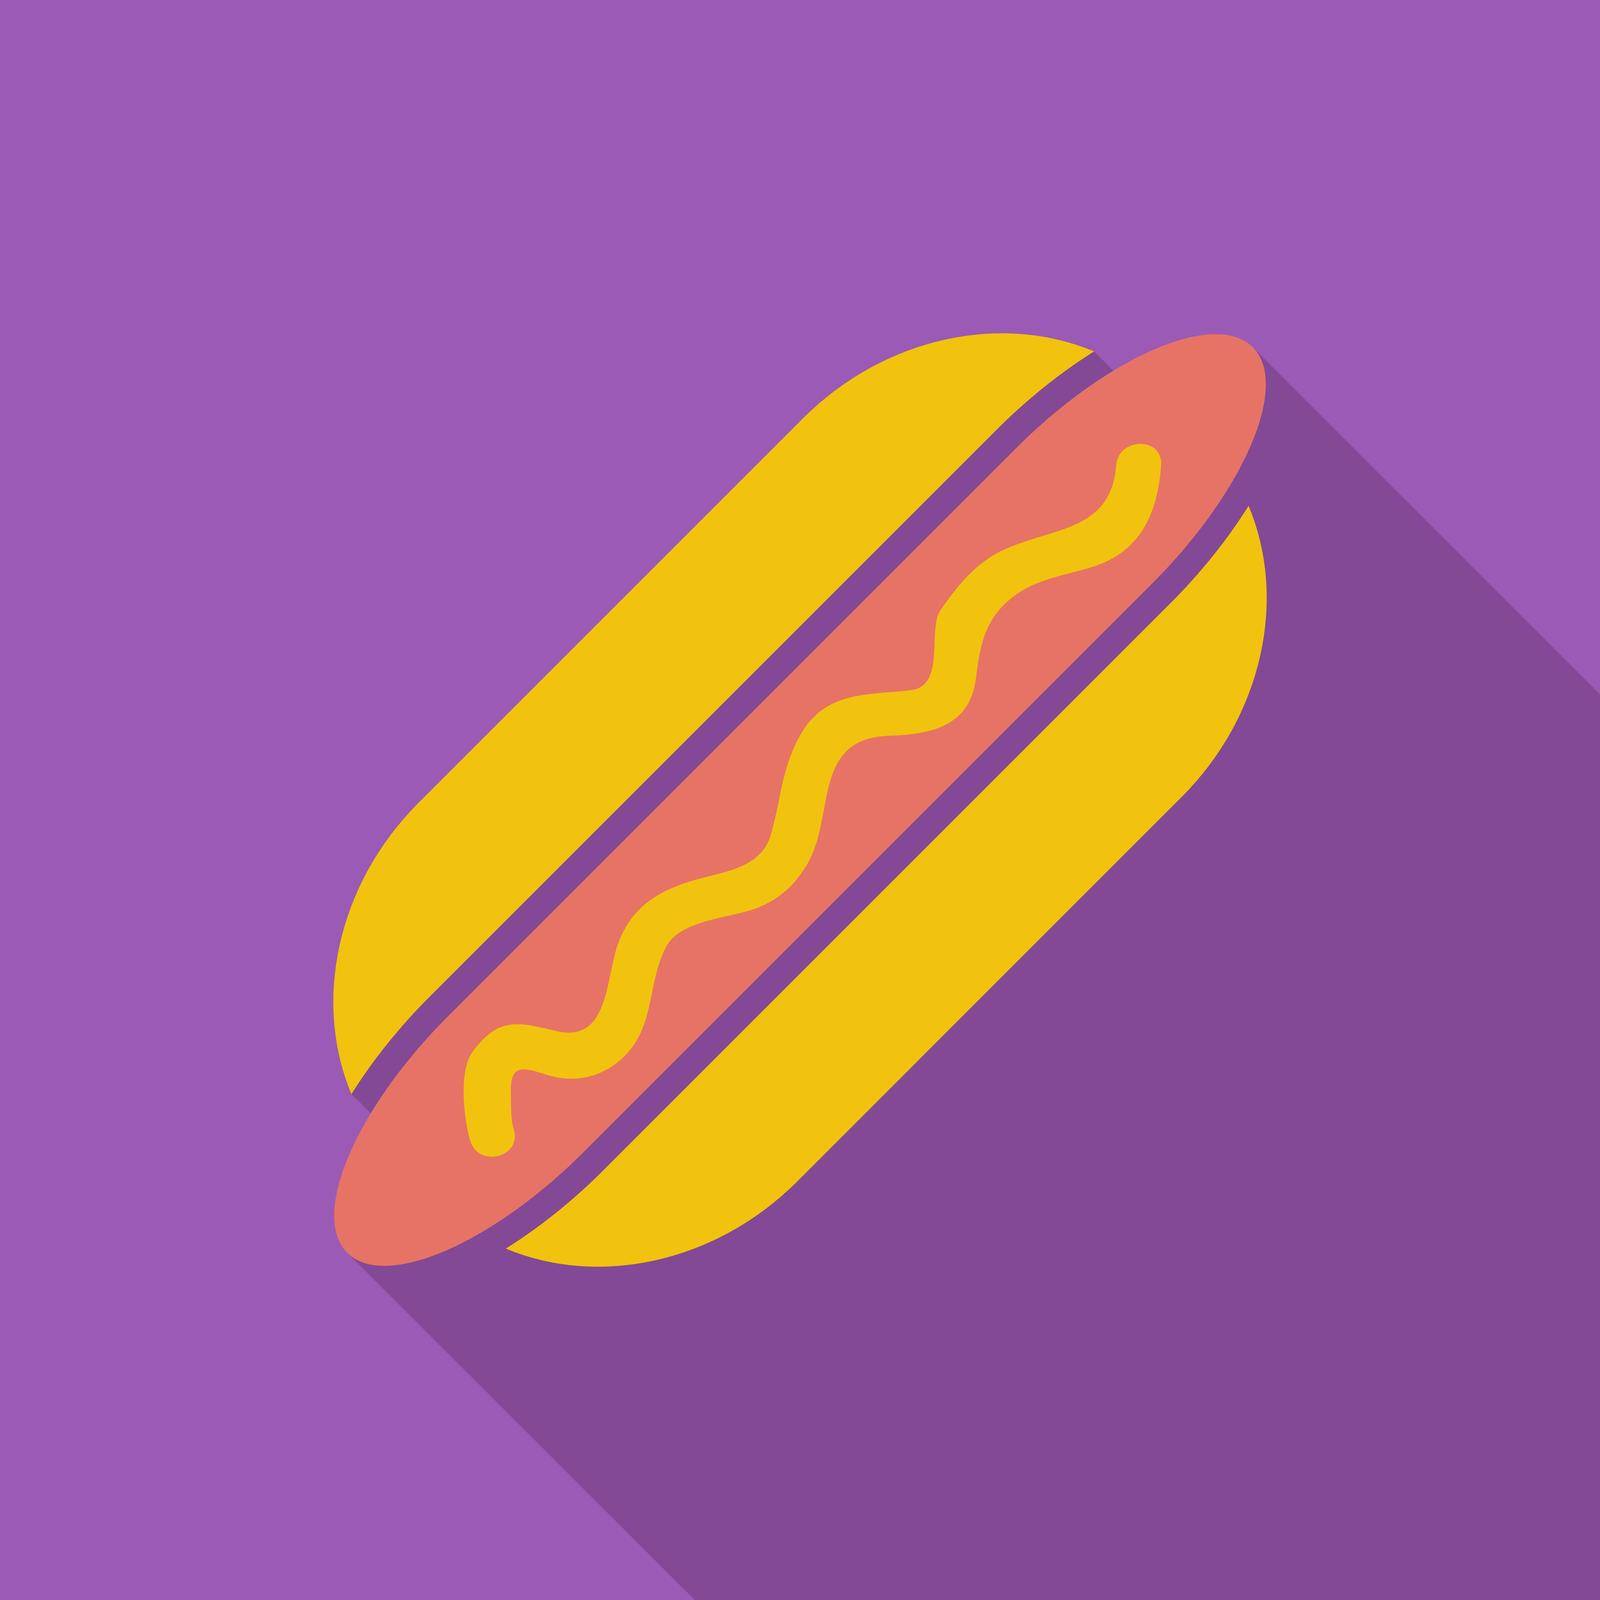 Hot dog icon. Flat vector related icon with long shadow for web and mobile applications. It can be used as - logo, pictogram, icon, infographic element. Vector Illustration.